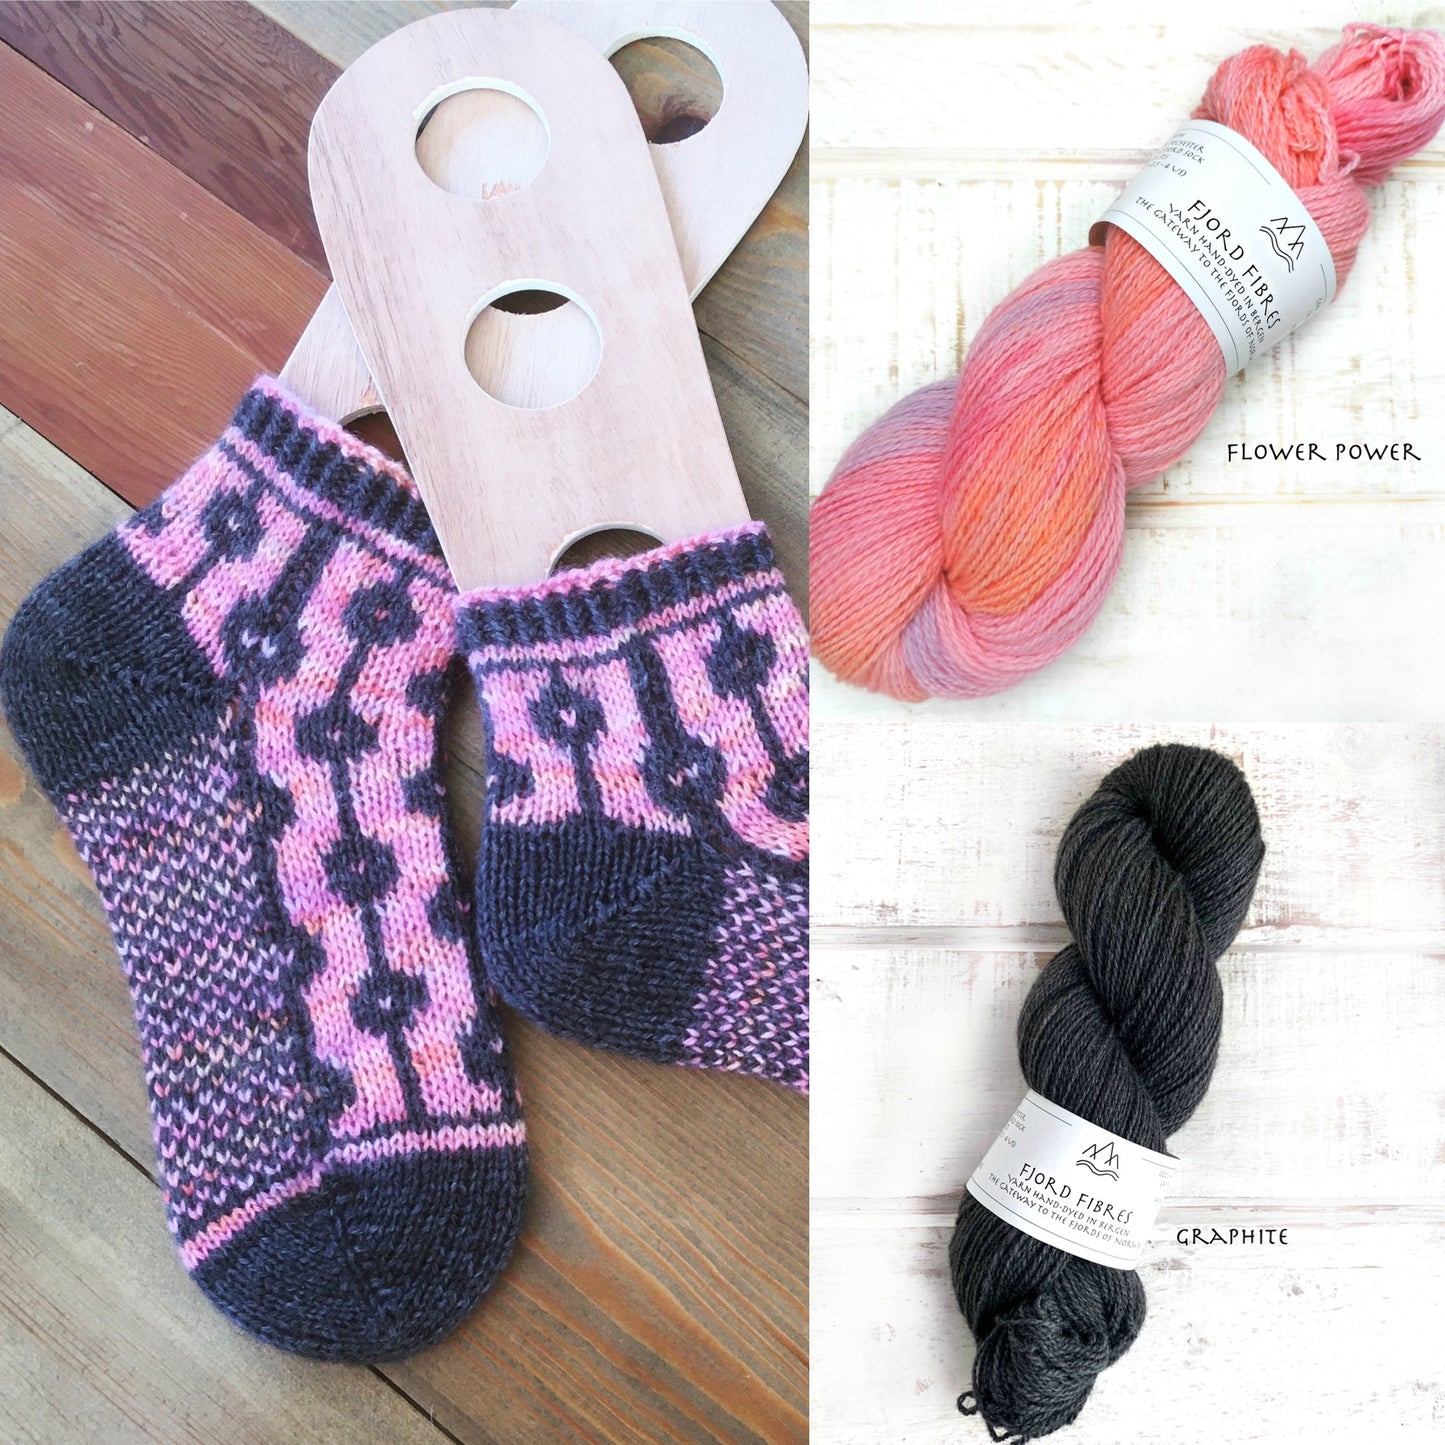 Dotted Line Socks Kit - Flower Power/Graphite - Yarn and Printed Pattern in English/Norwegian